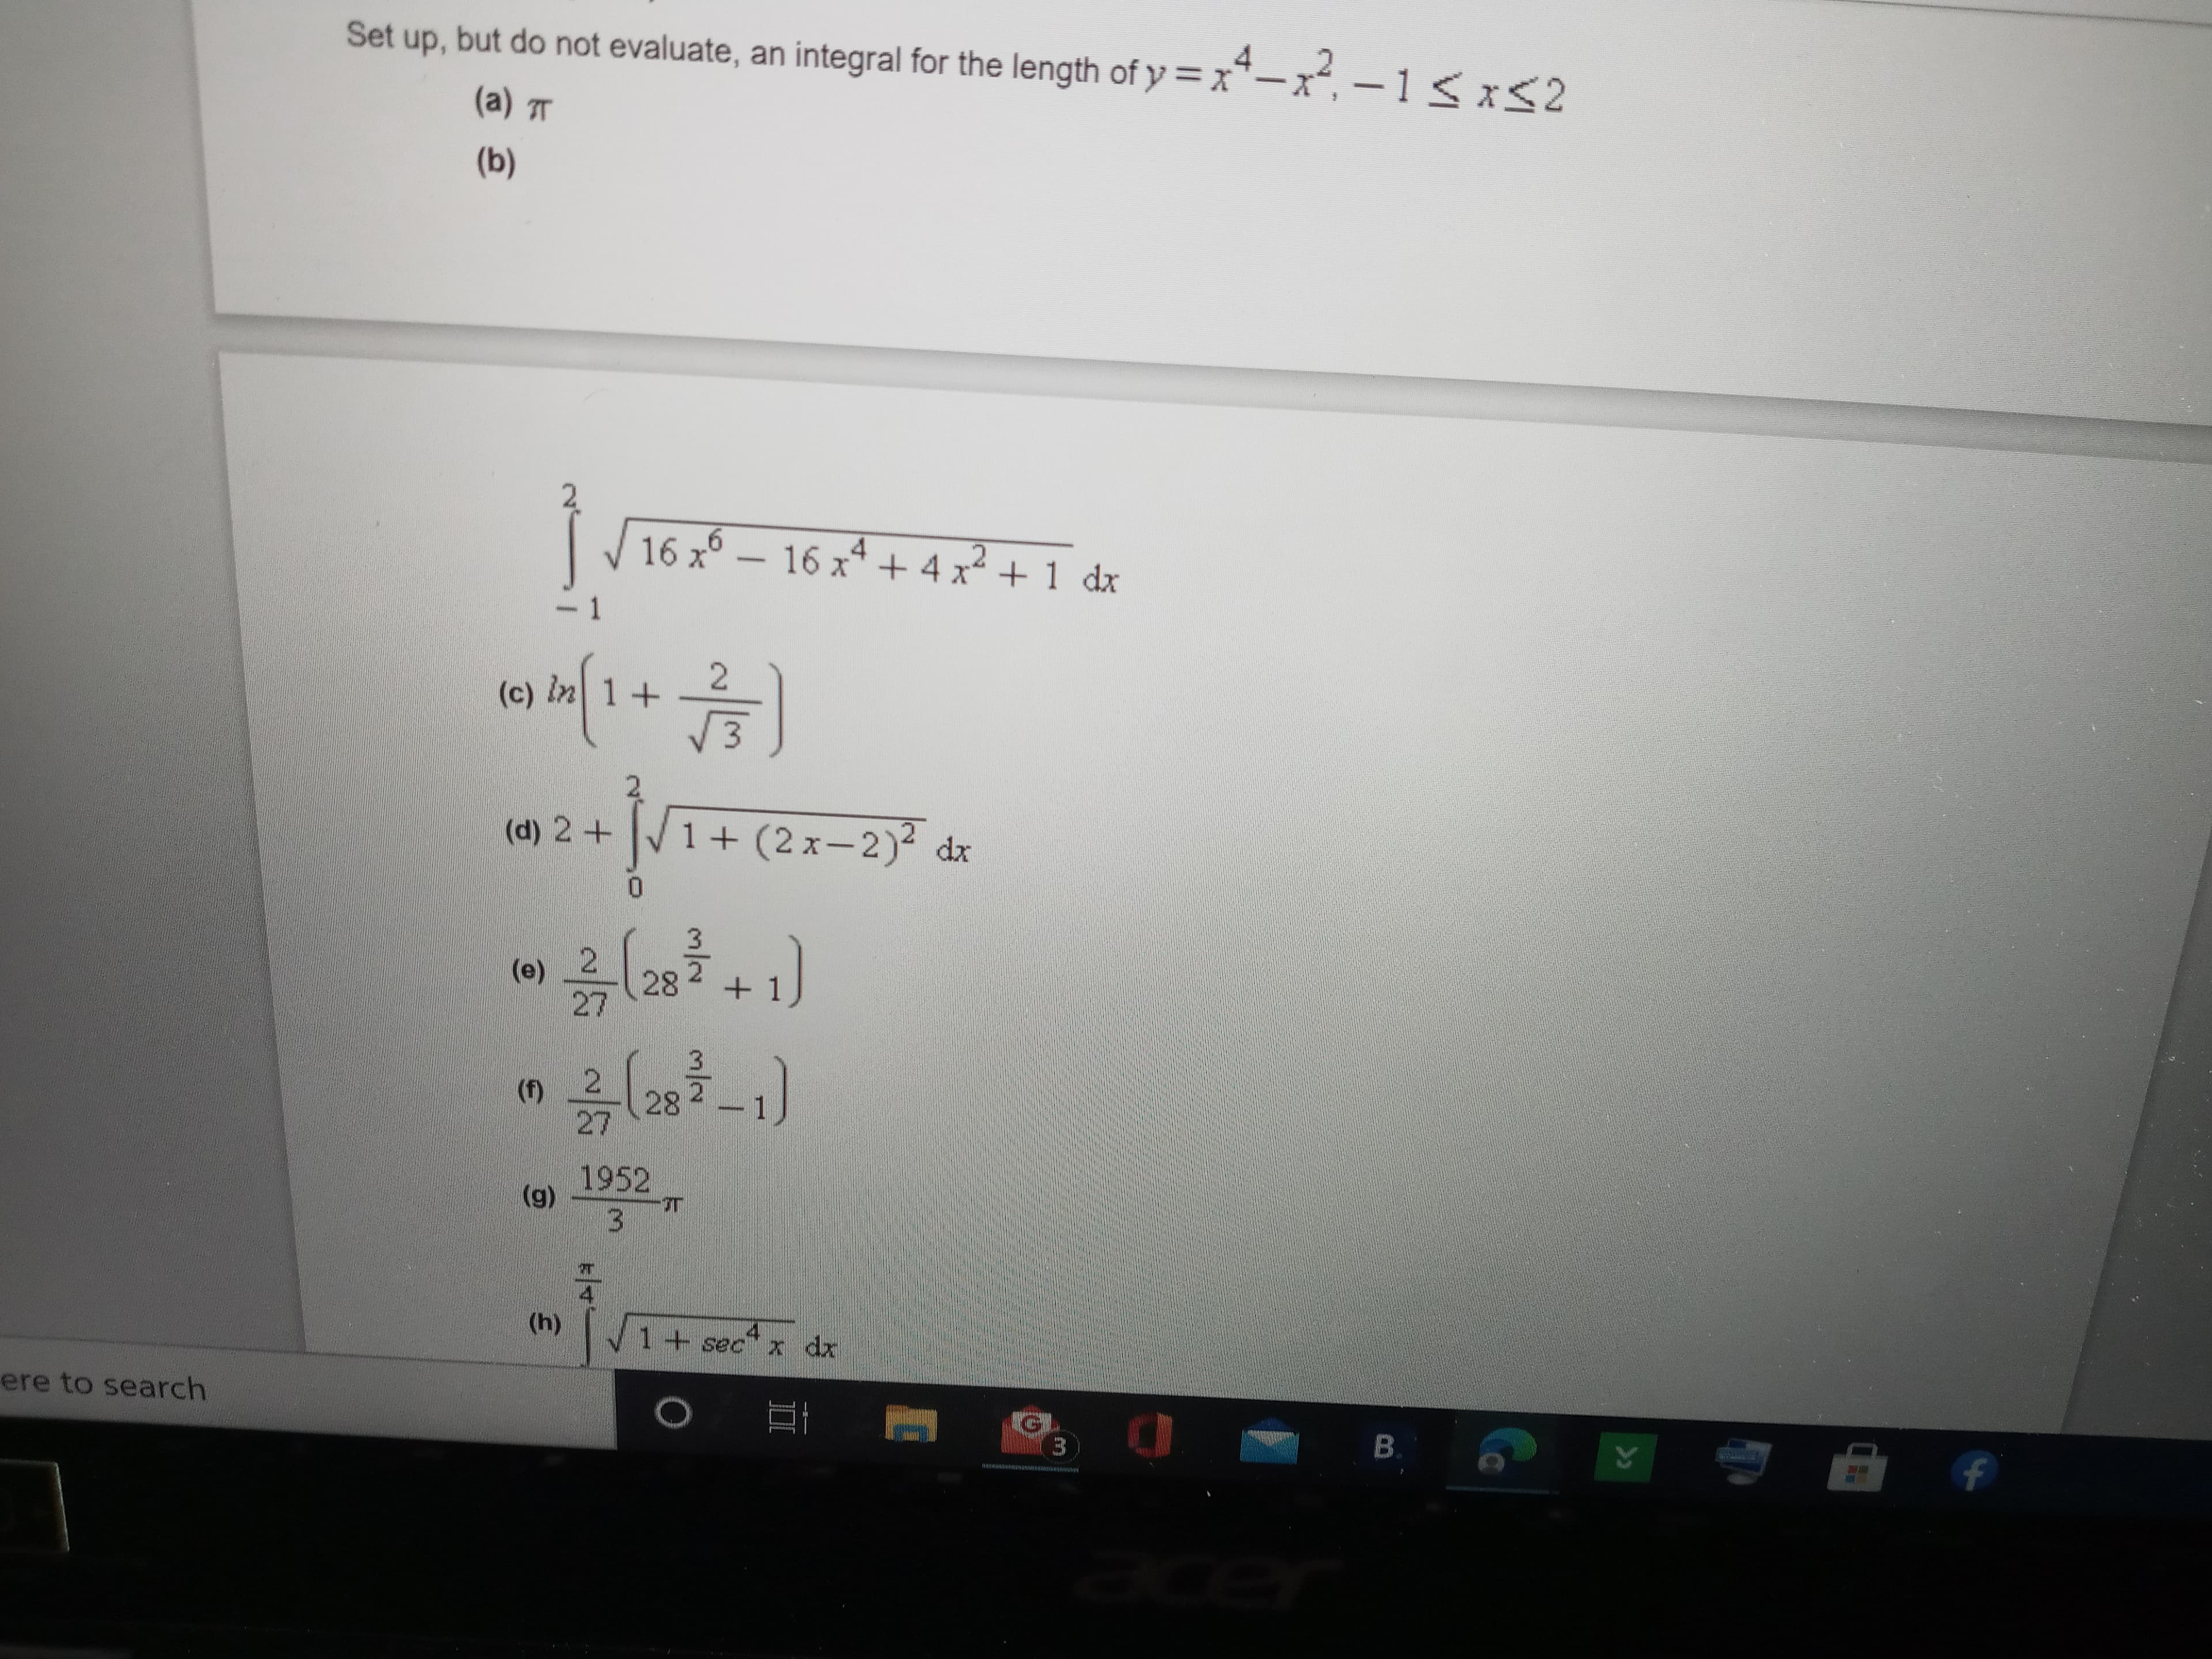 Set up, but do not evaluate, an integral for the length of y=x*-x, – 1 <x<2
(a) T
